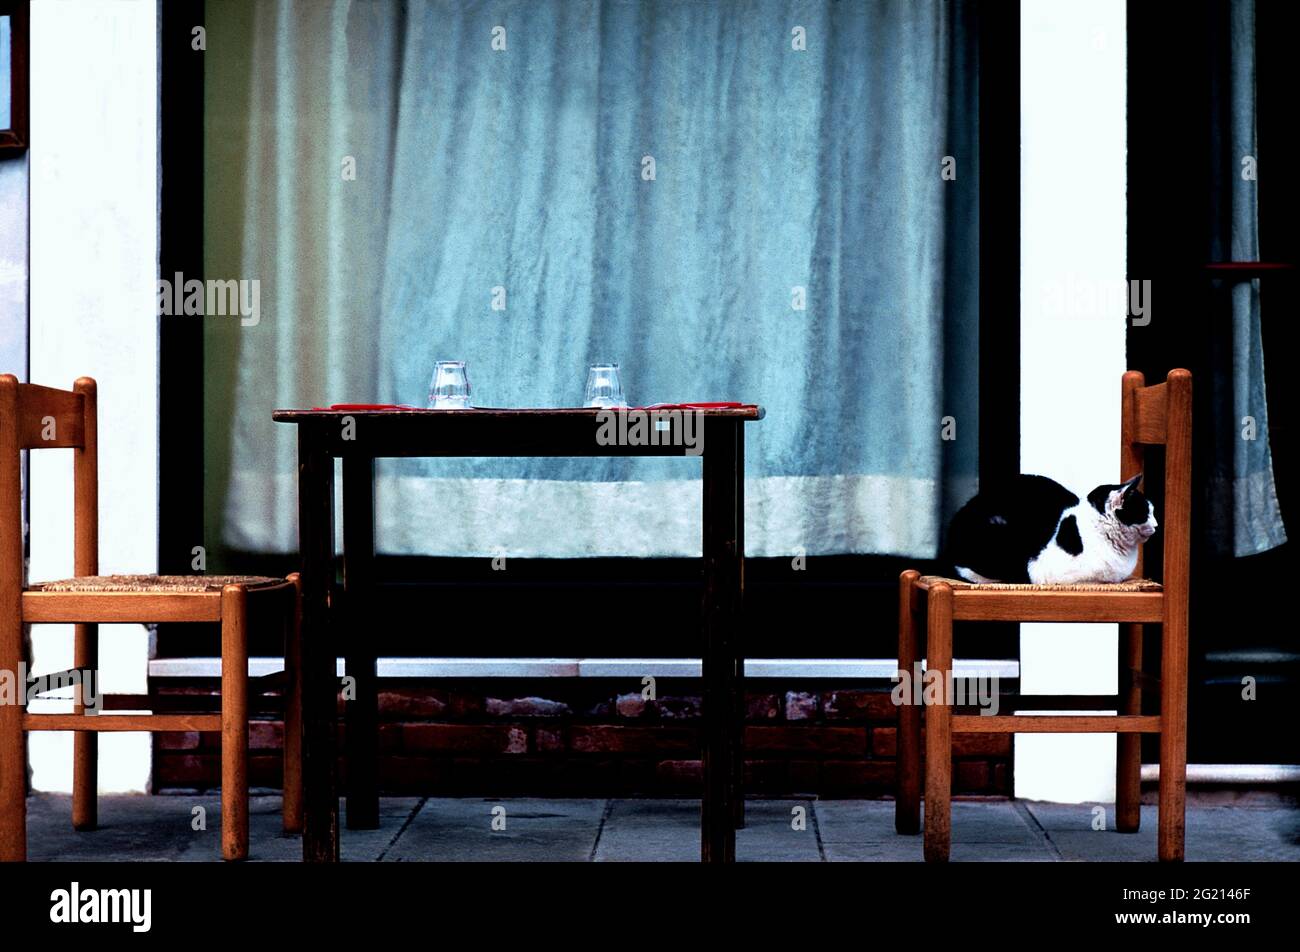 Image of a Cat sitting at a Restaurant in the Cannaregio District of Venice. Stock Photo